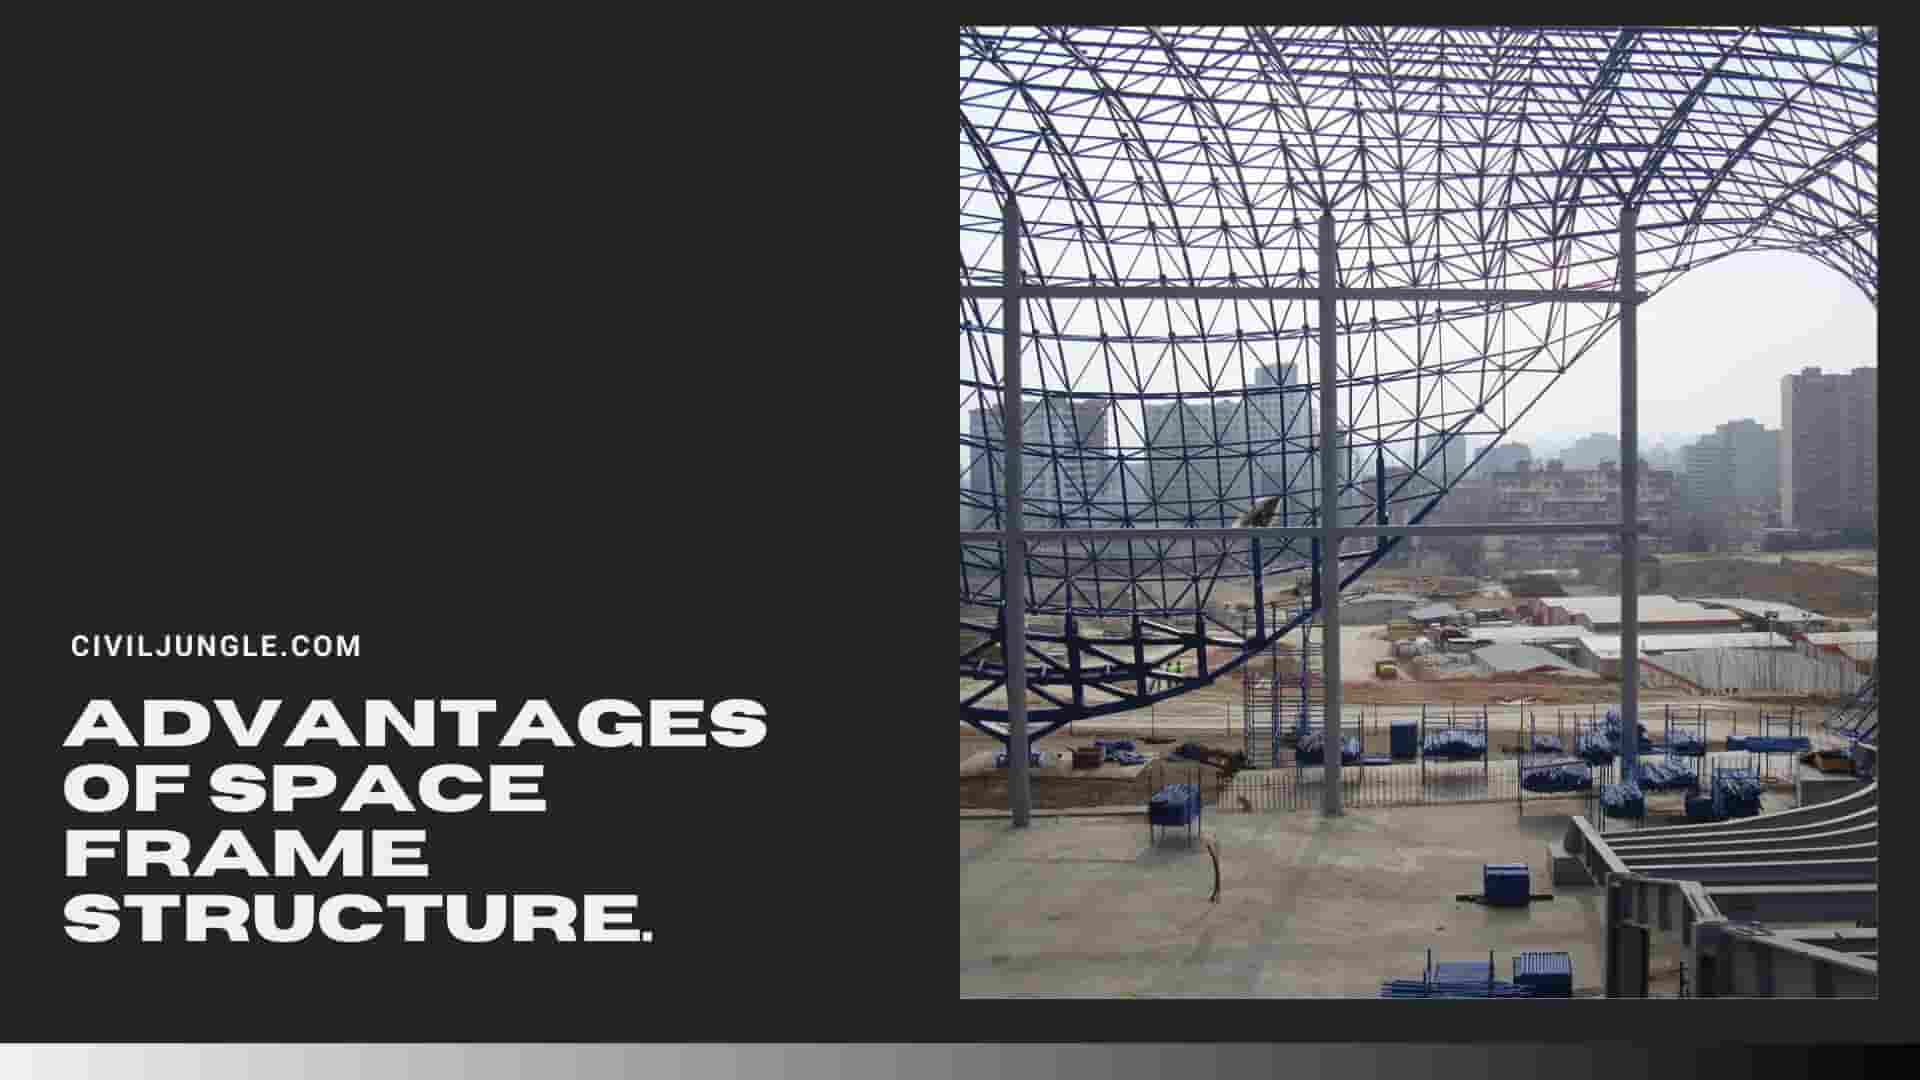 Advantages of Space Frame Structure.